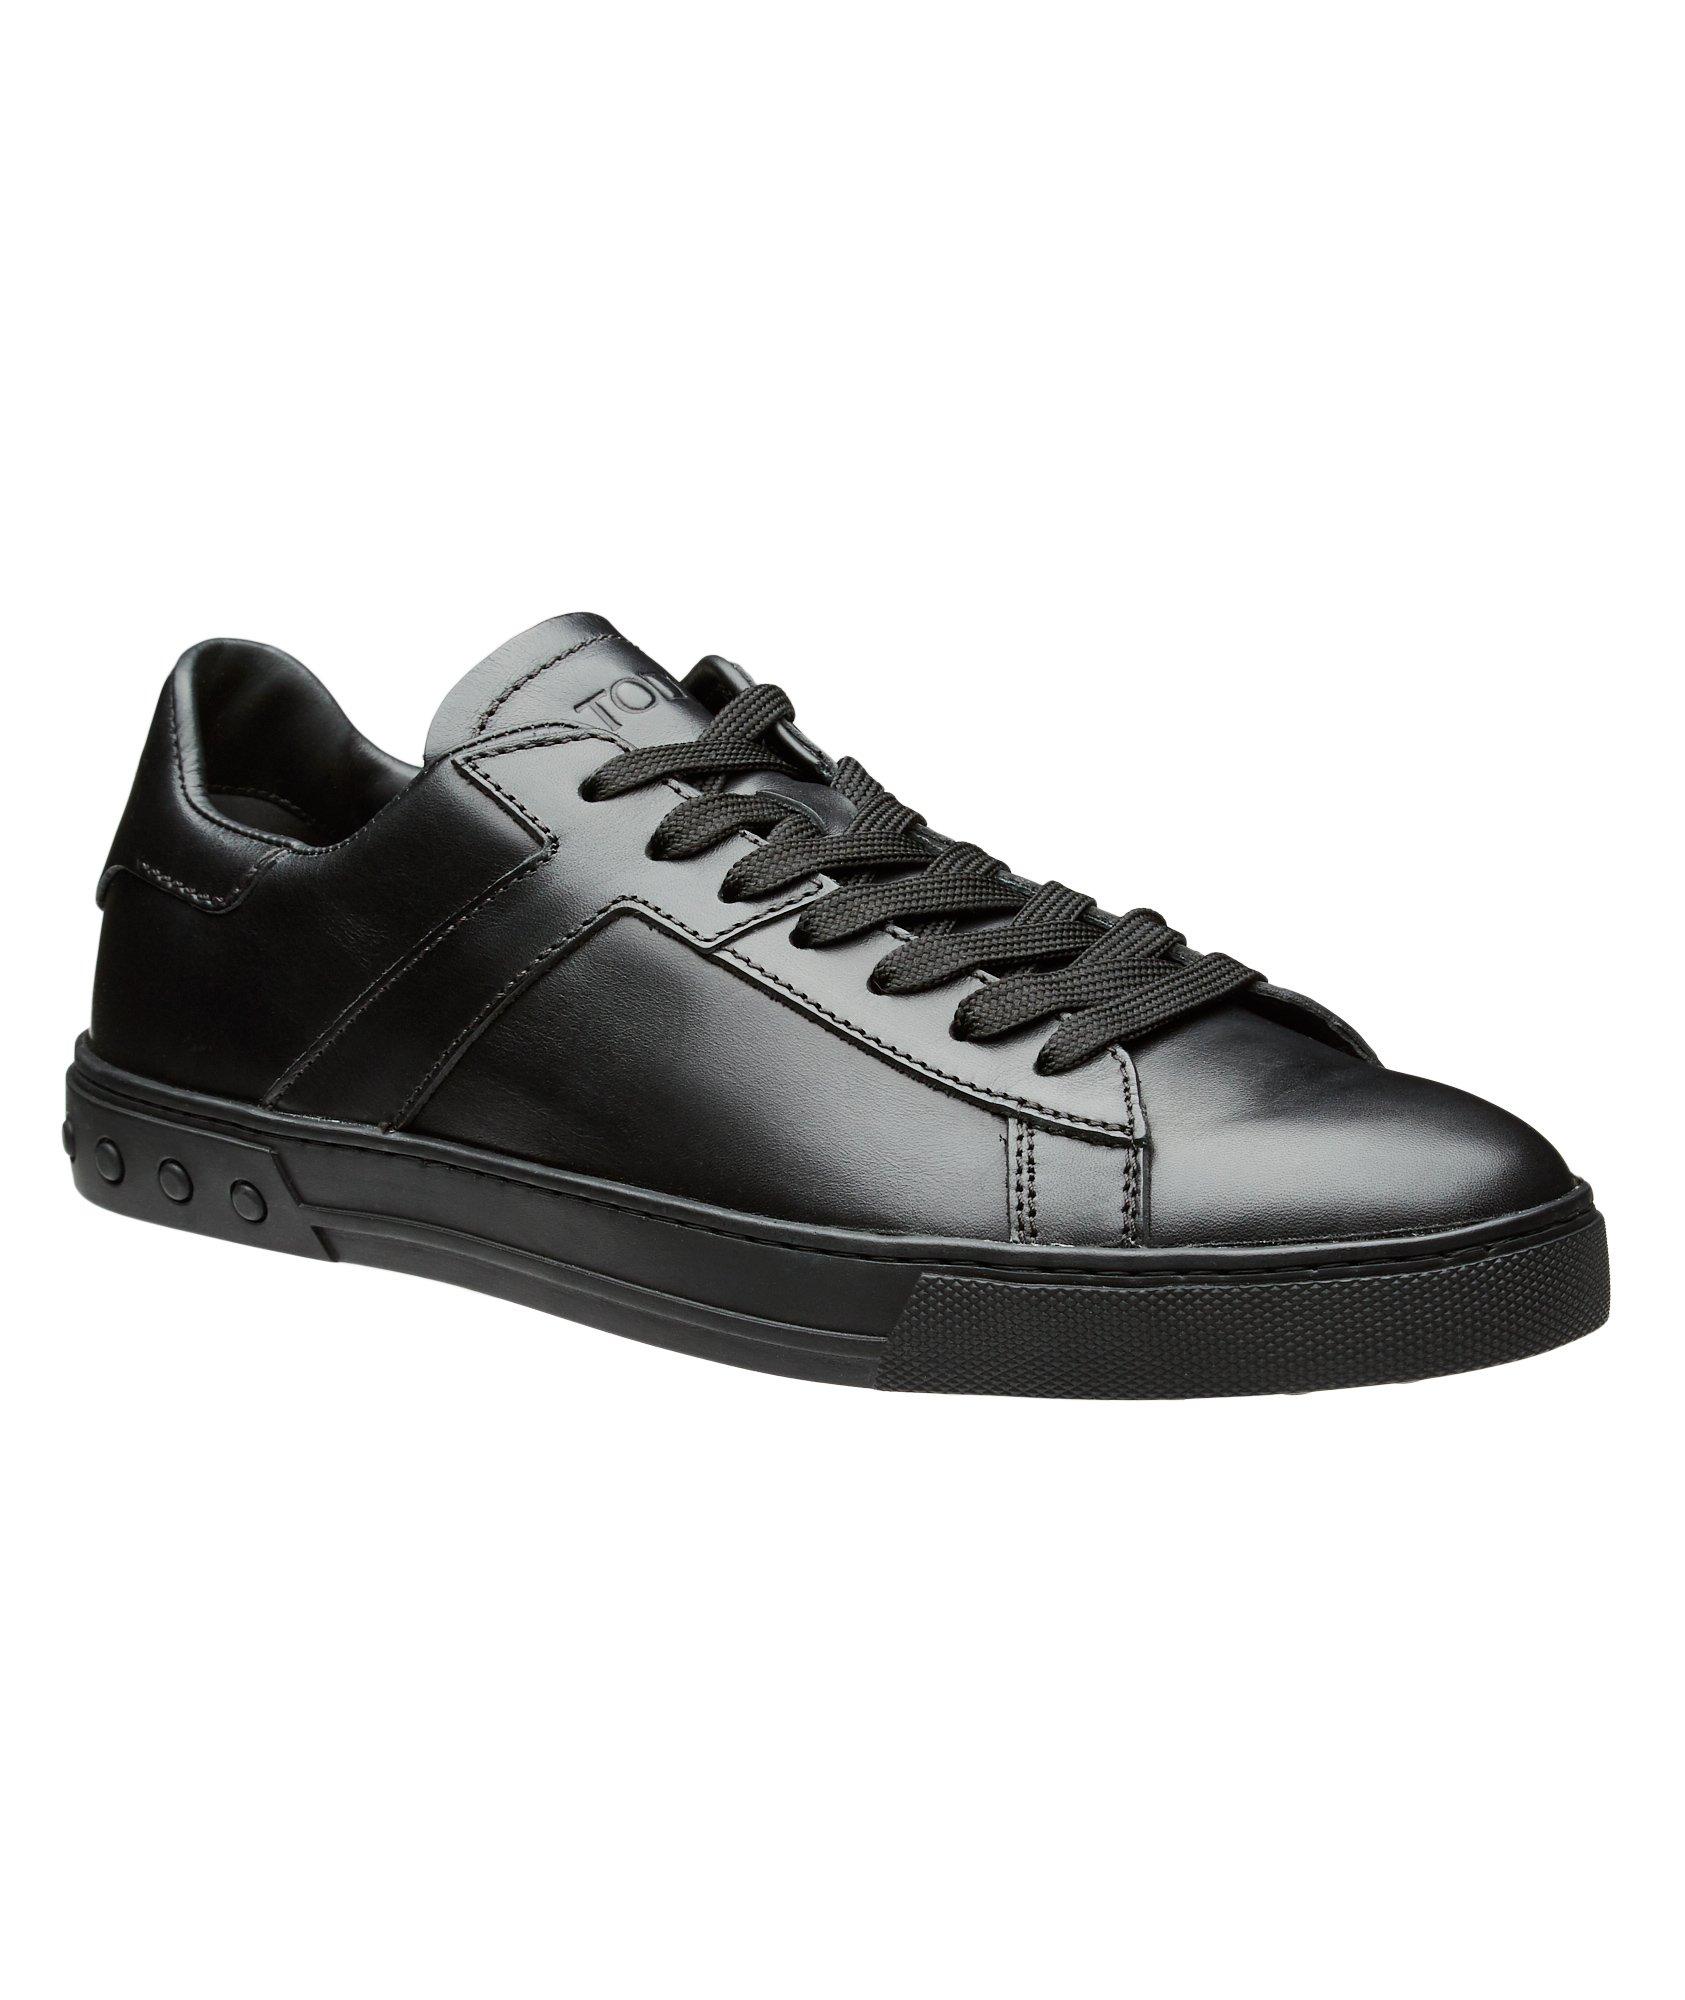 Leather Sneakers image 0